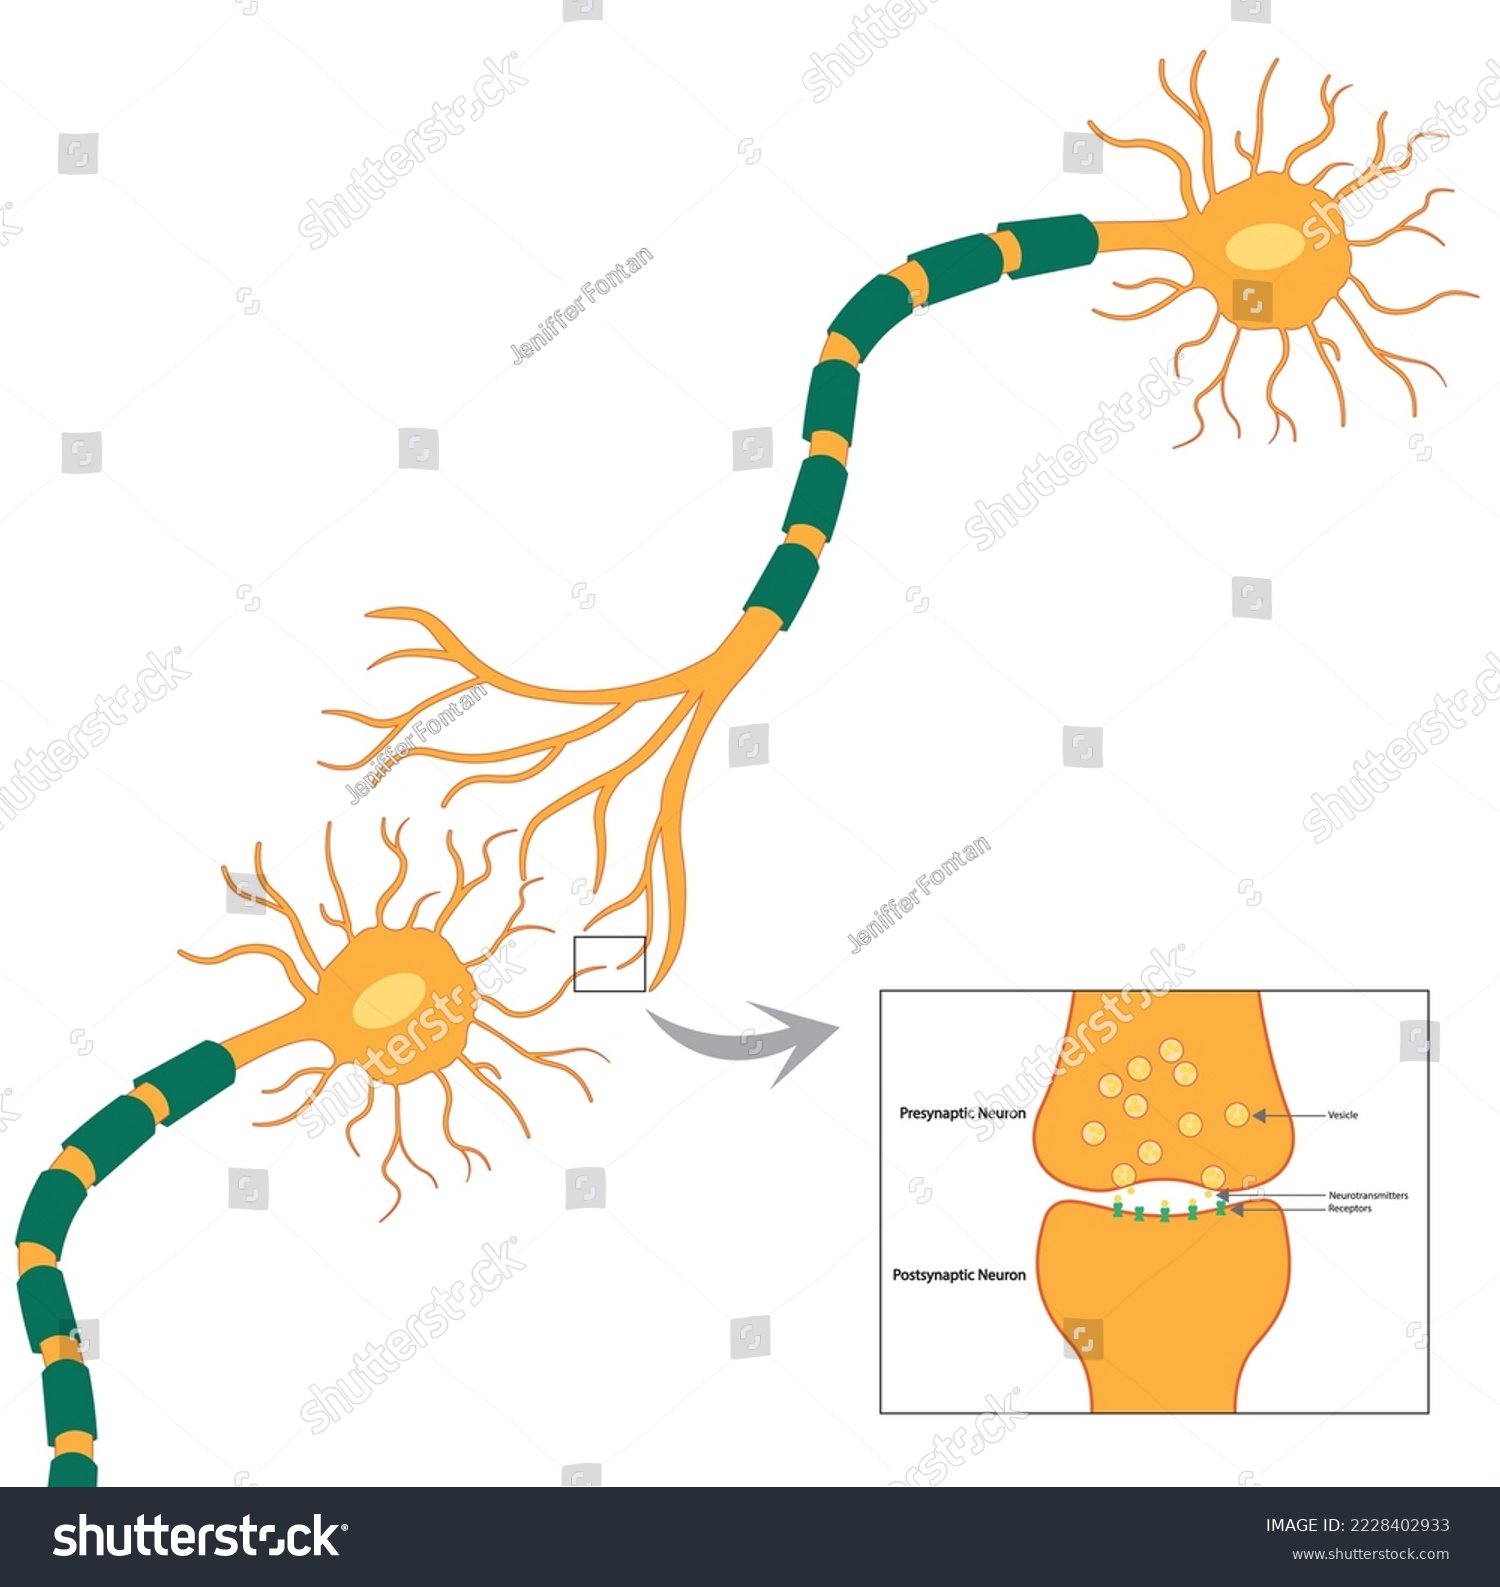 SVG of Neuron Synapse illustration. Conection between pre and pos synaptic neuron illustration svg